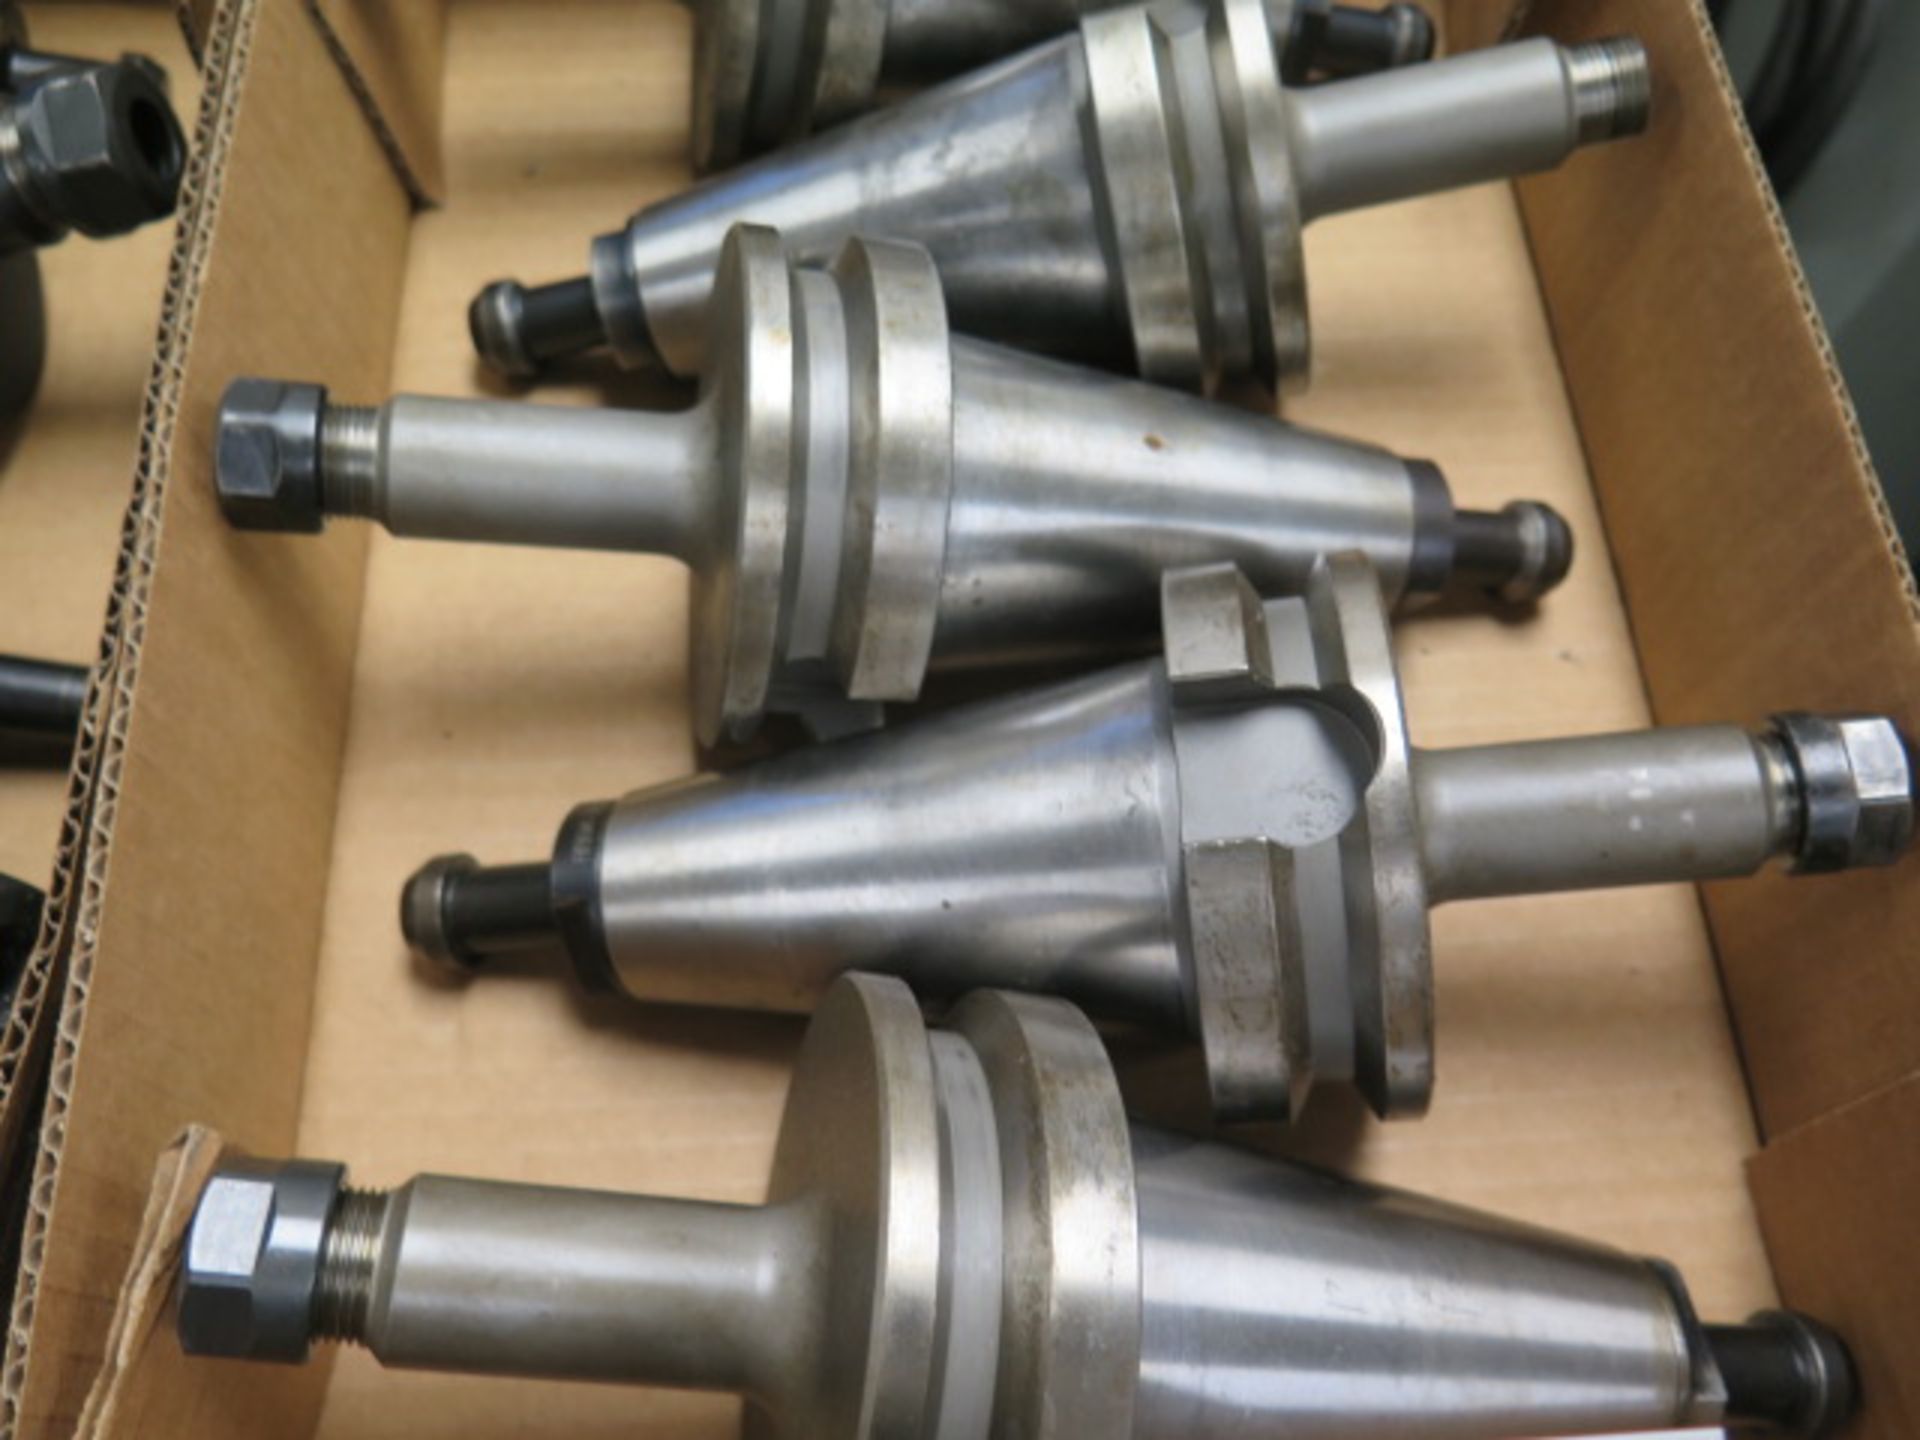 BT-50 Taper ER16 Collet chucks (5) (SOLD AS-IS - NO WARRANTY) (Located @ 2229 Ringwood Ave. San Jose - Image 4 of 6